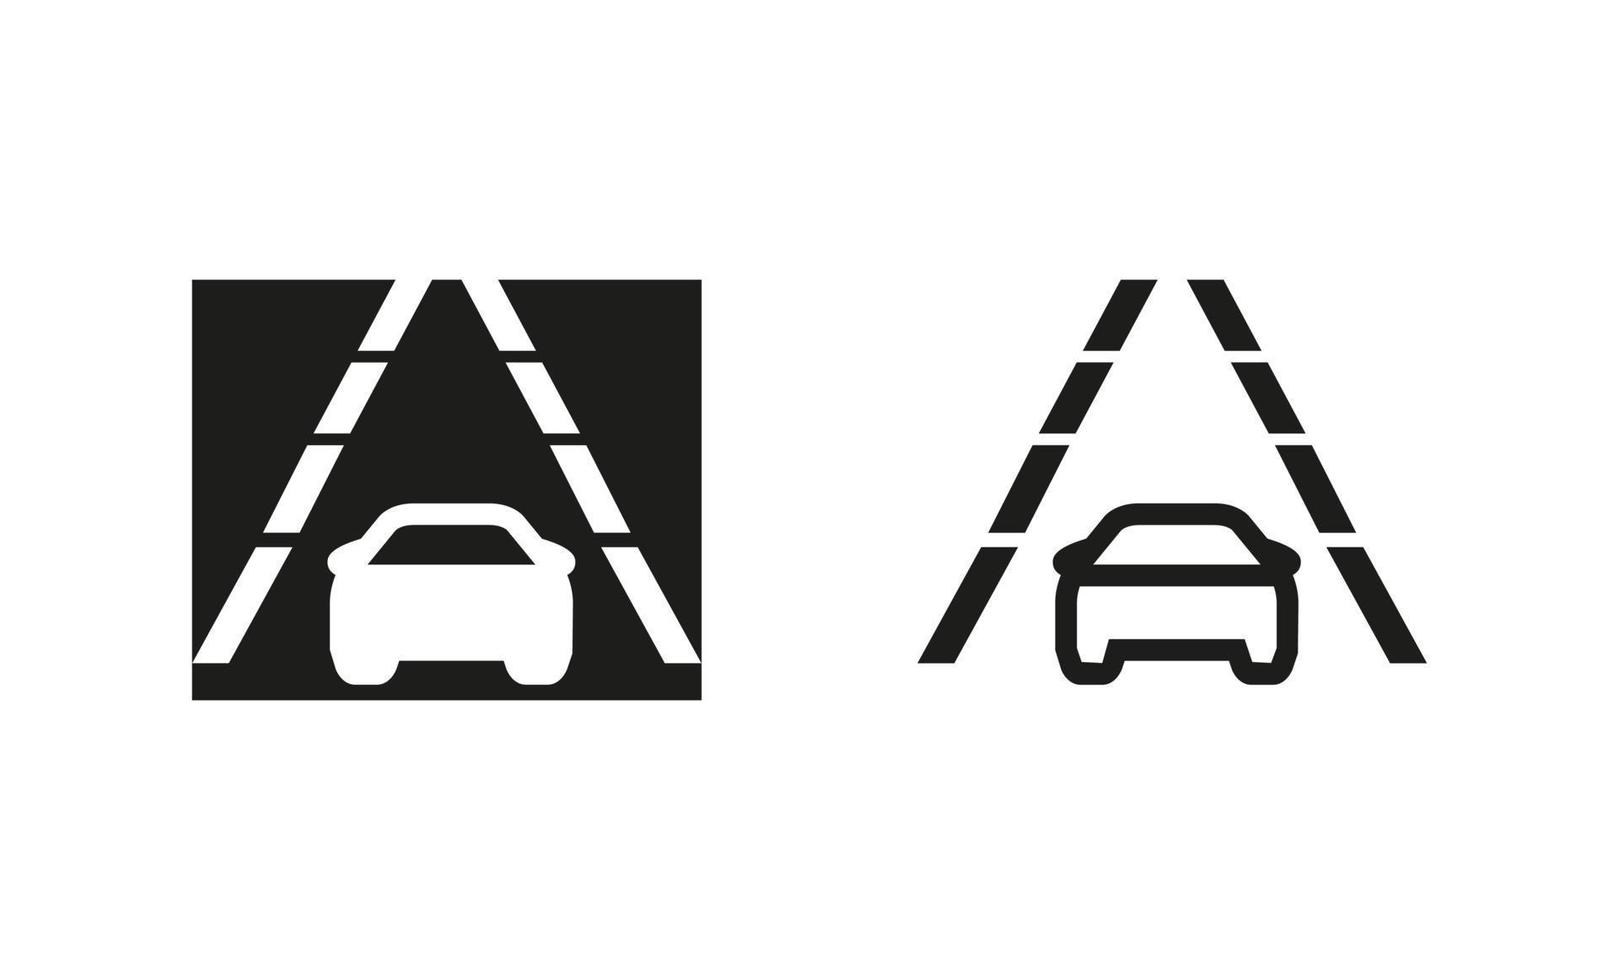 Car lane tracking icon. silhouette and linear original logo. Simple outline style sign symbol. Vector illustration isolated on white background. EPS 10.